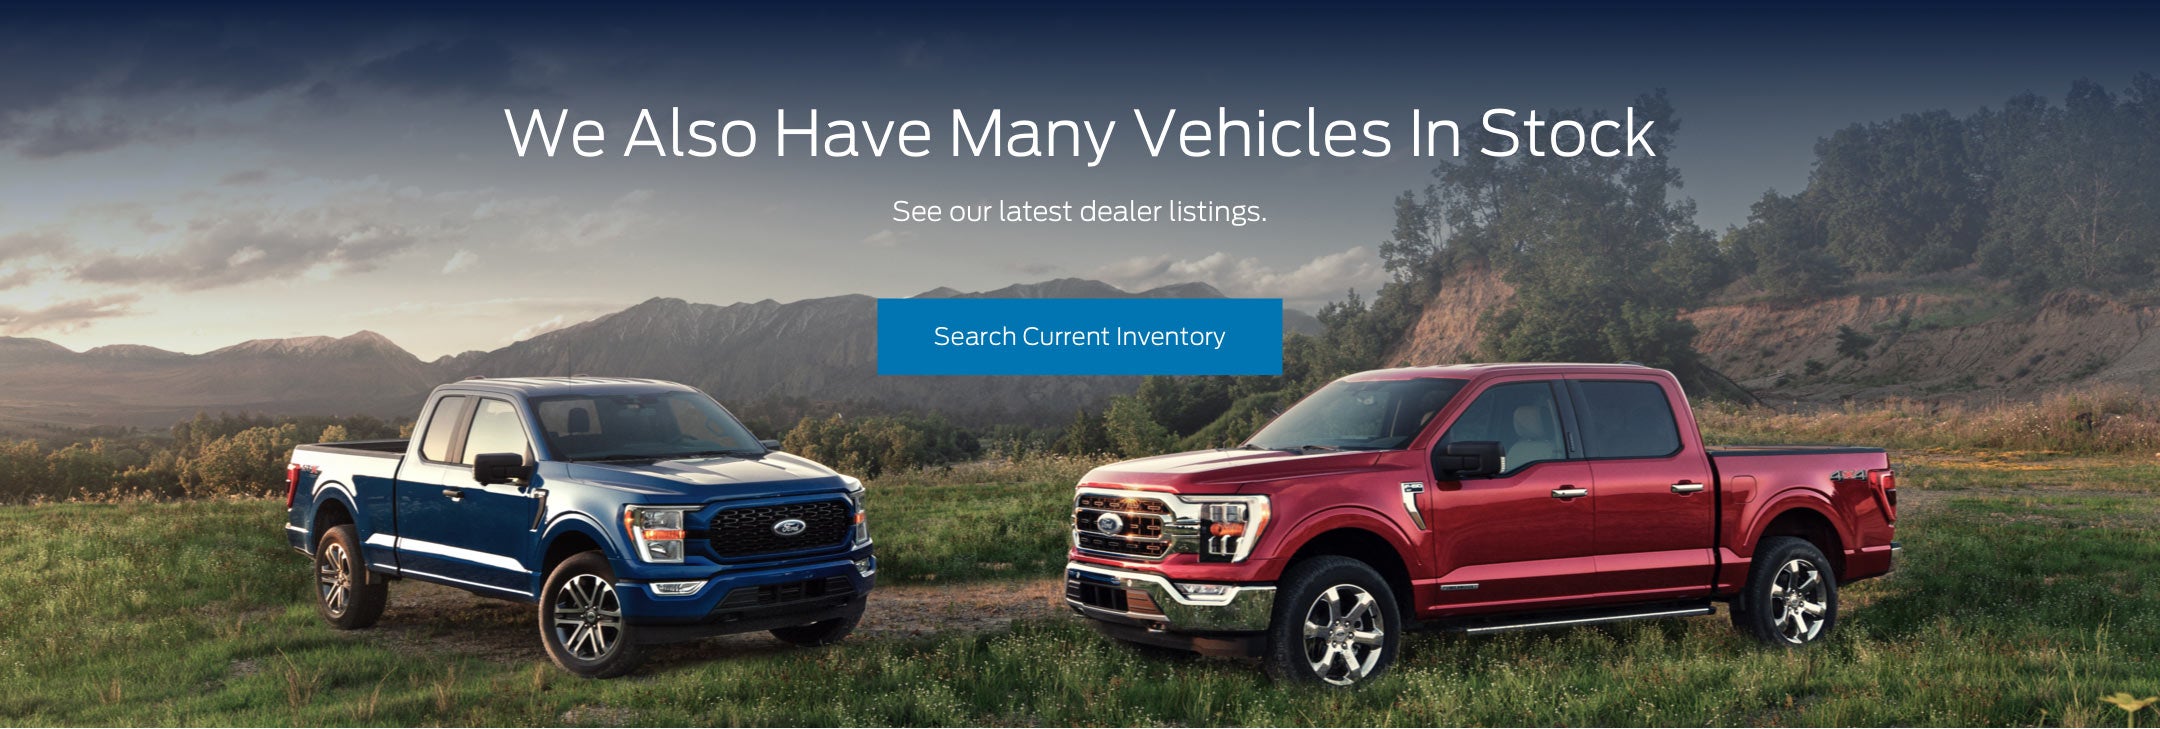 Ford vehicles in stock | Carey Ford in Carey OH